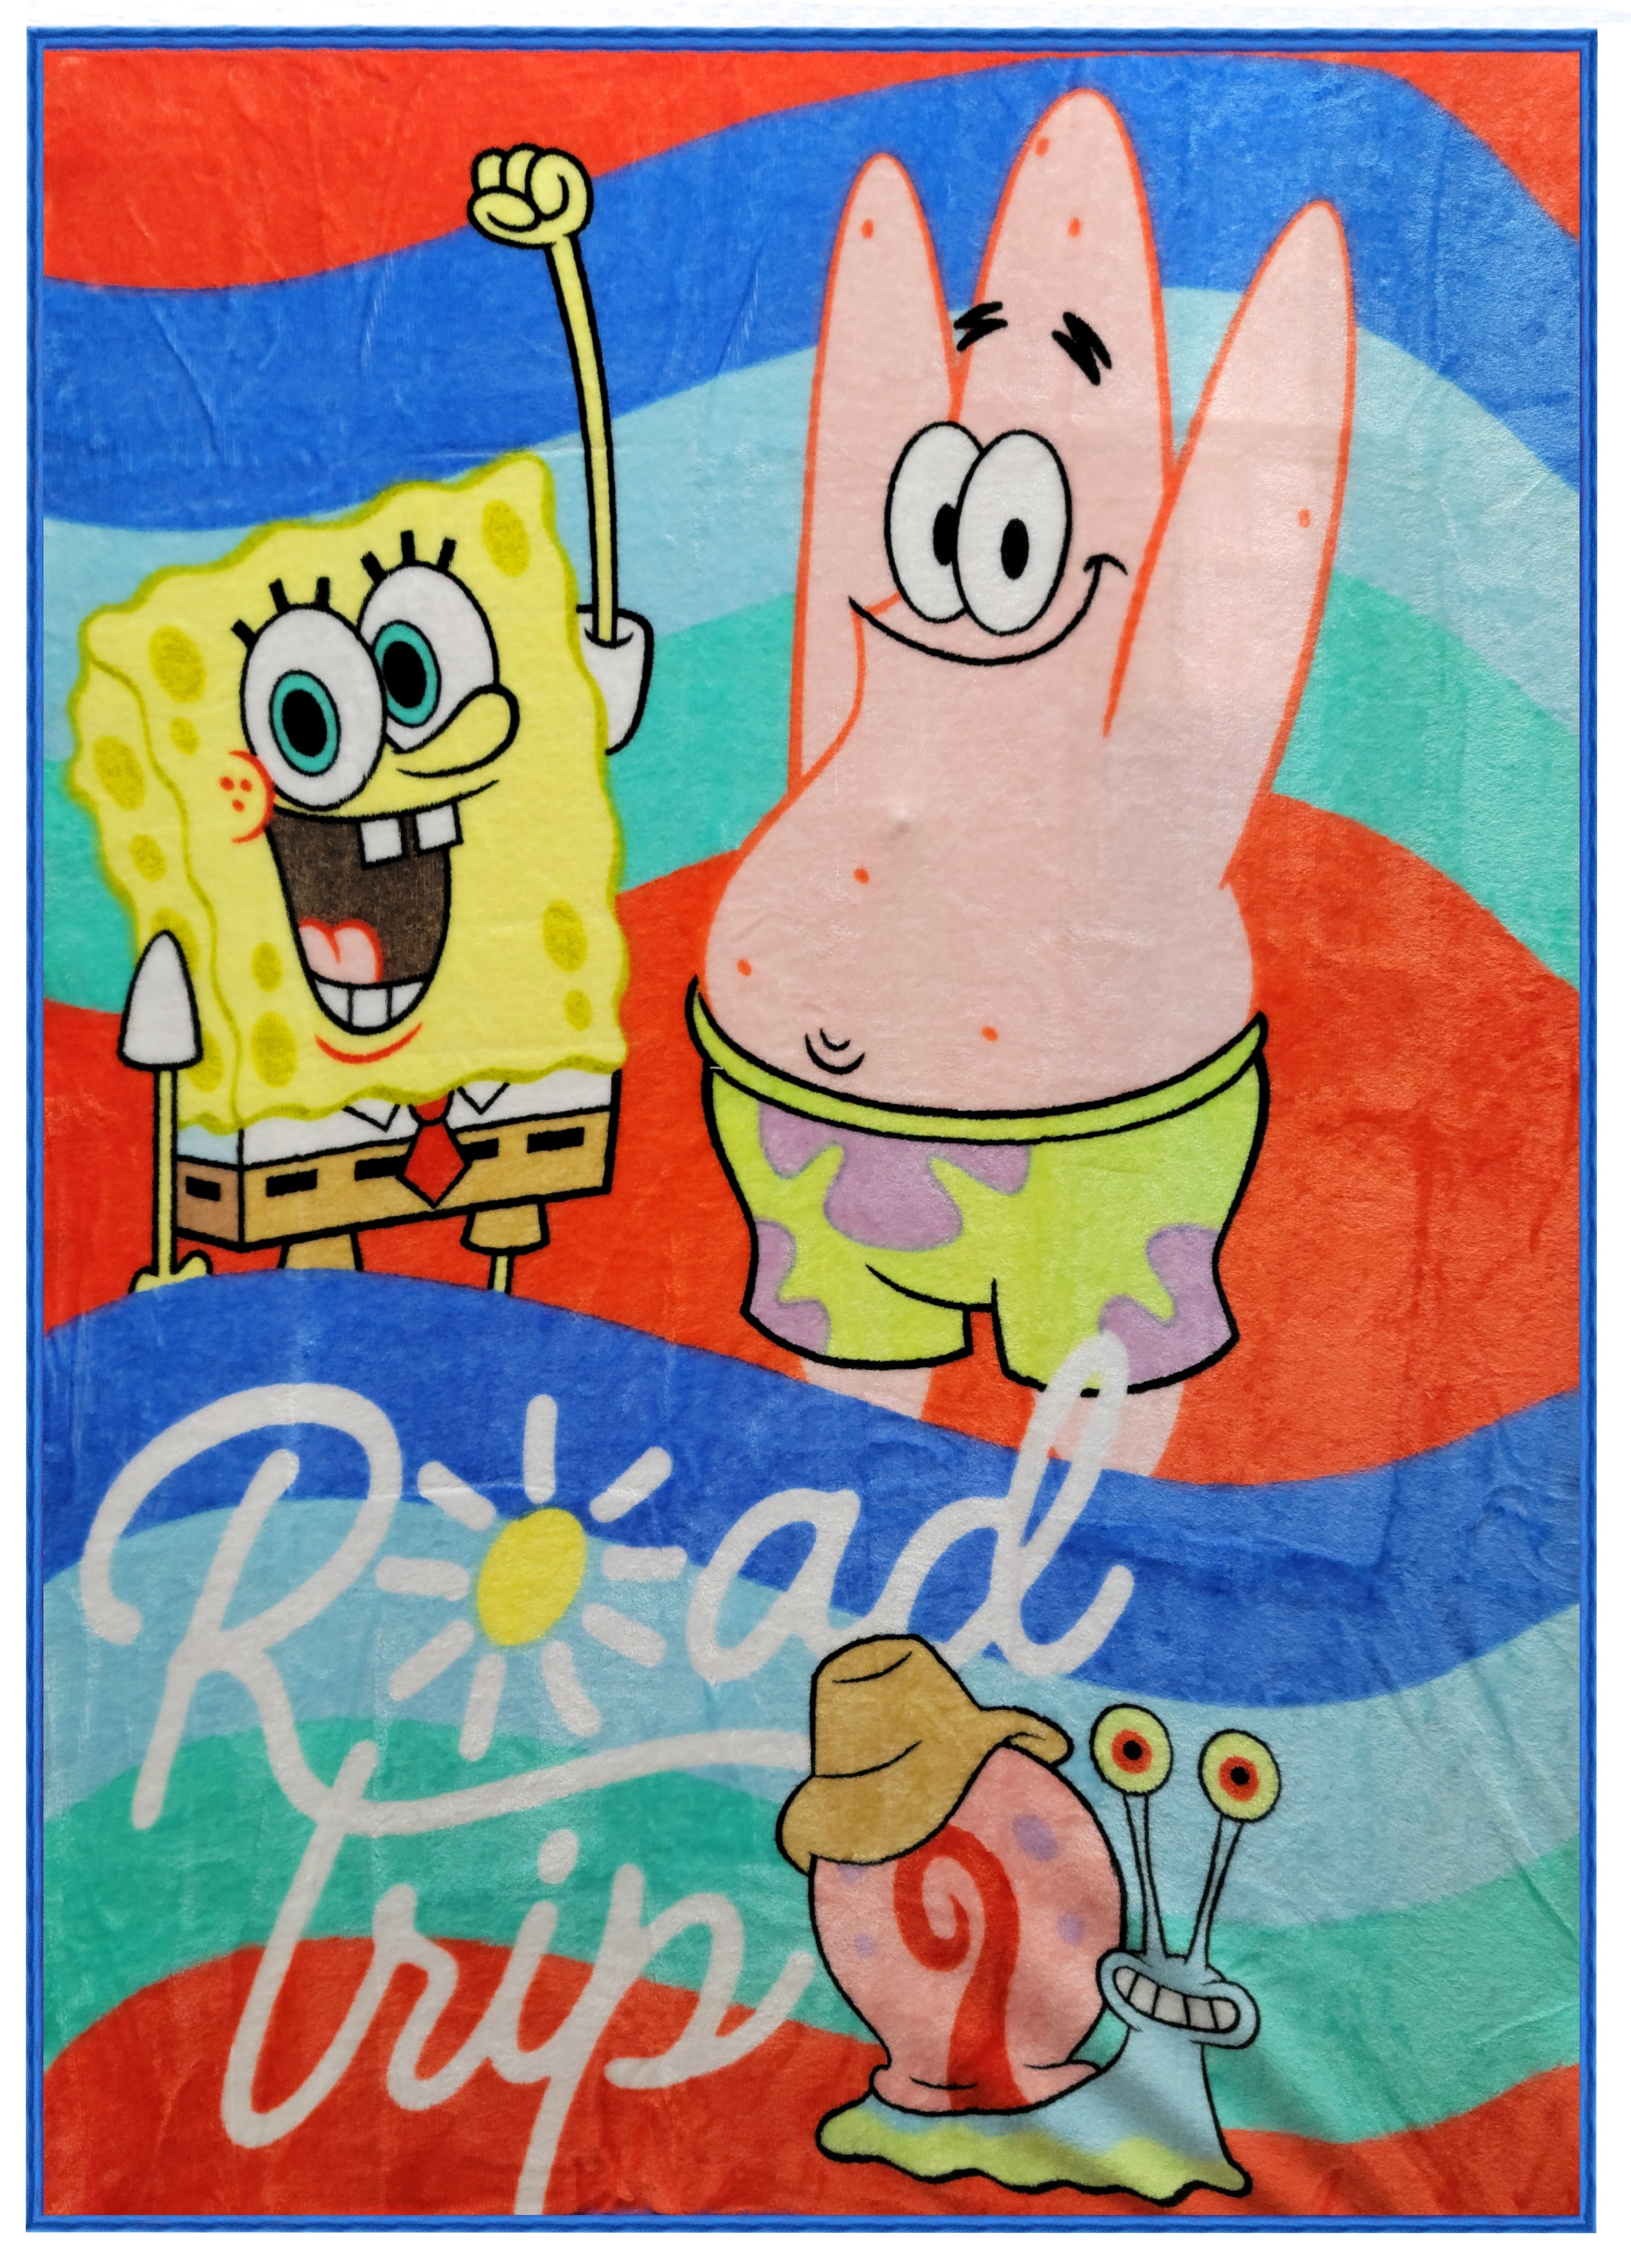 Kids and Toddler Throw Blanket Nickelodeon SpongeBob SquarePants. Super Soft and Cozy. 40x50 inches